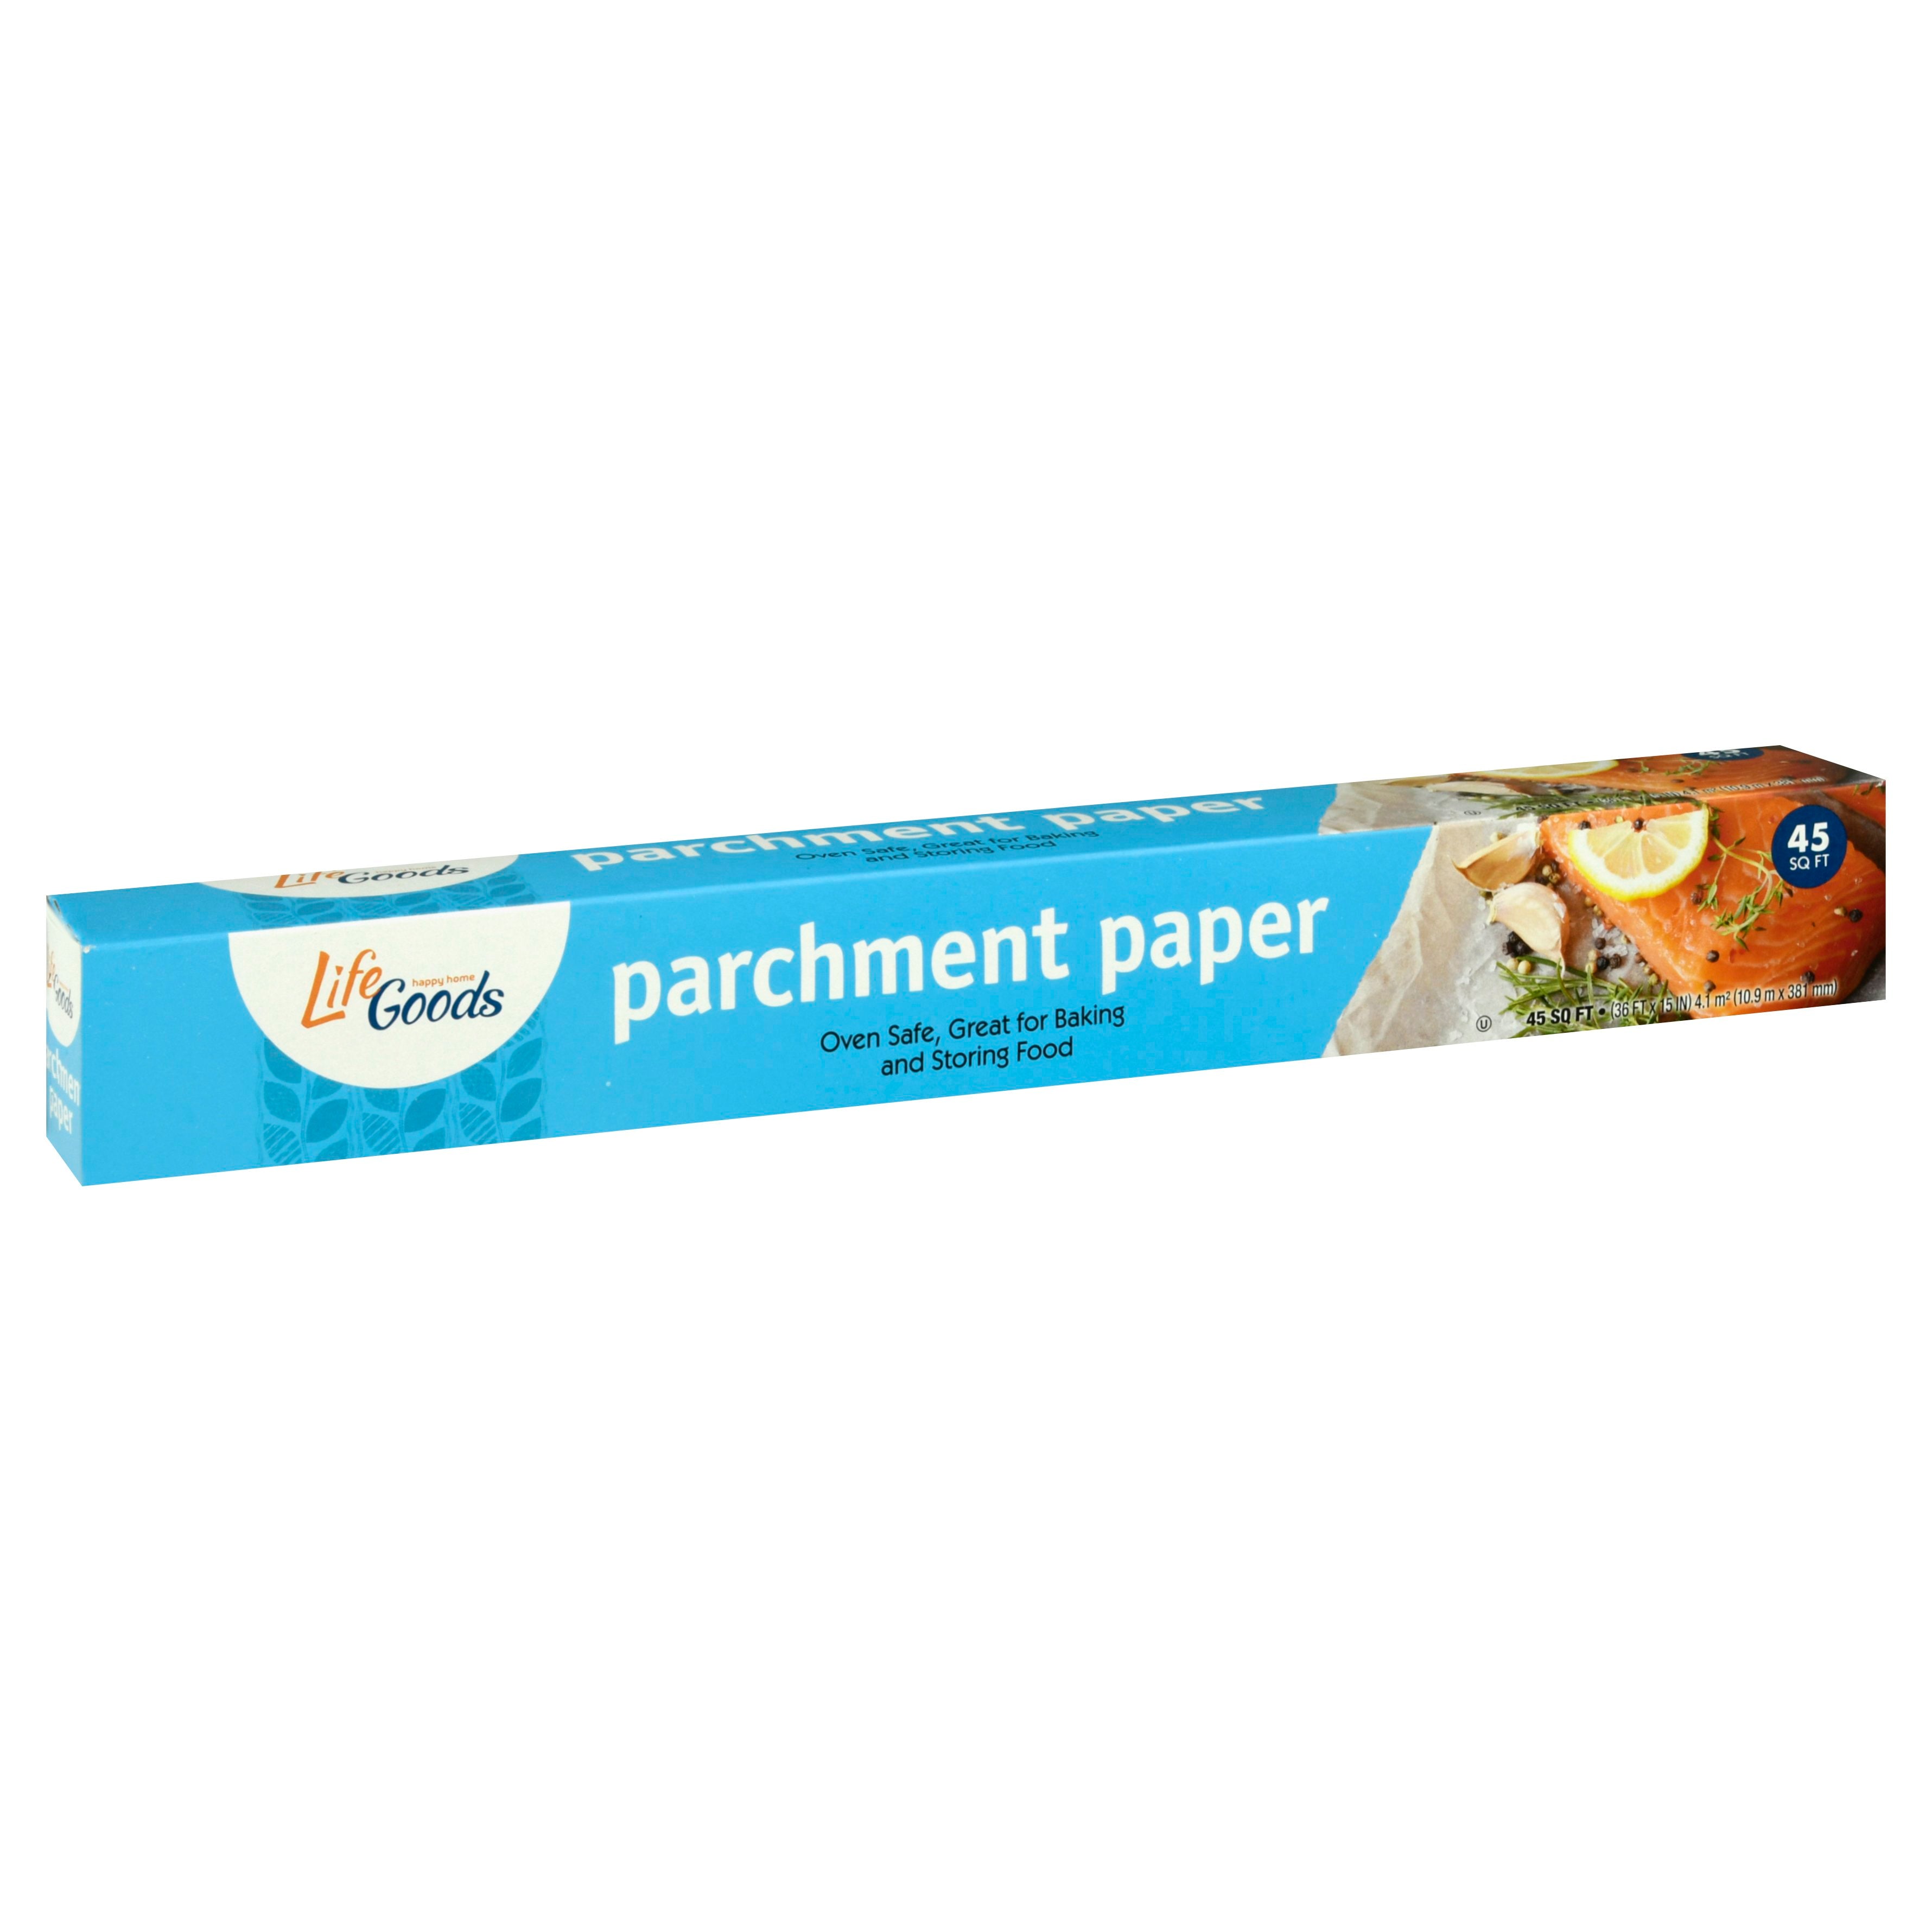 Reynolds Useful Kitchens Parchment Paper Roll, 60 Square Feet 50